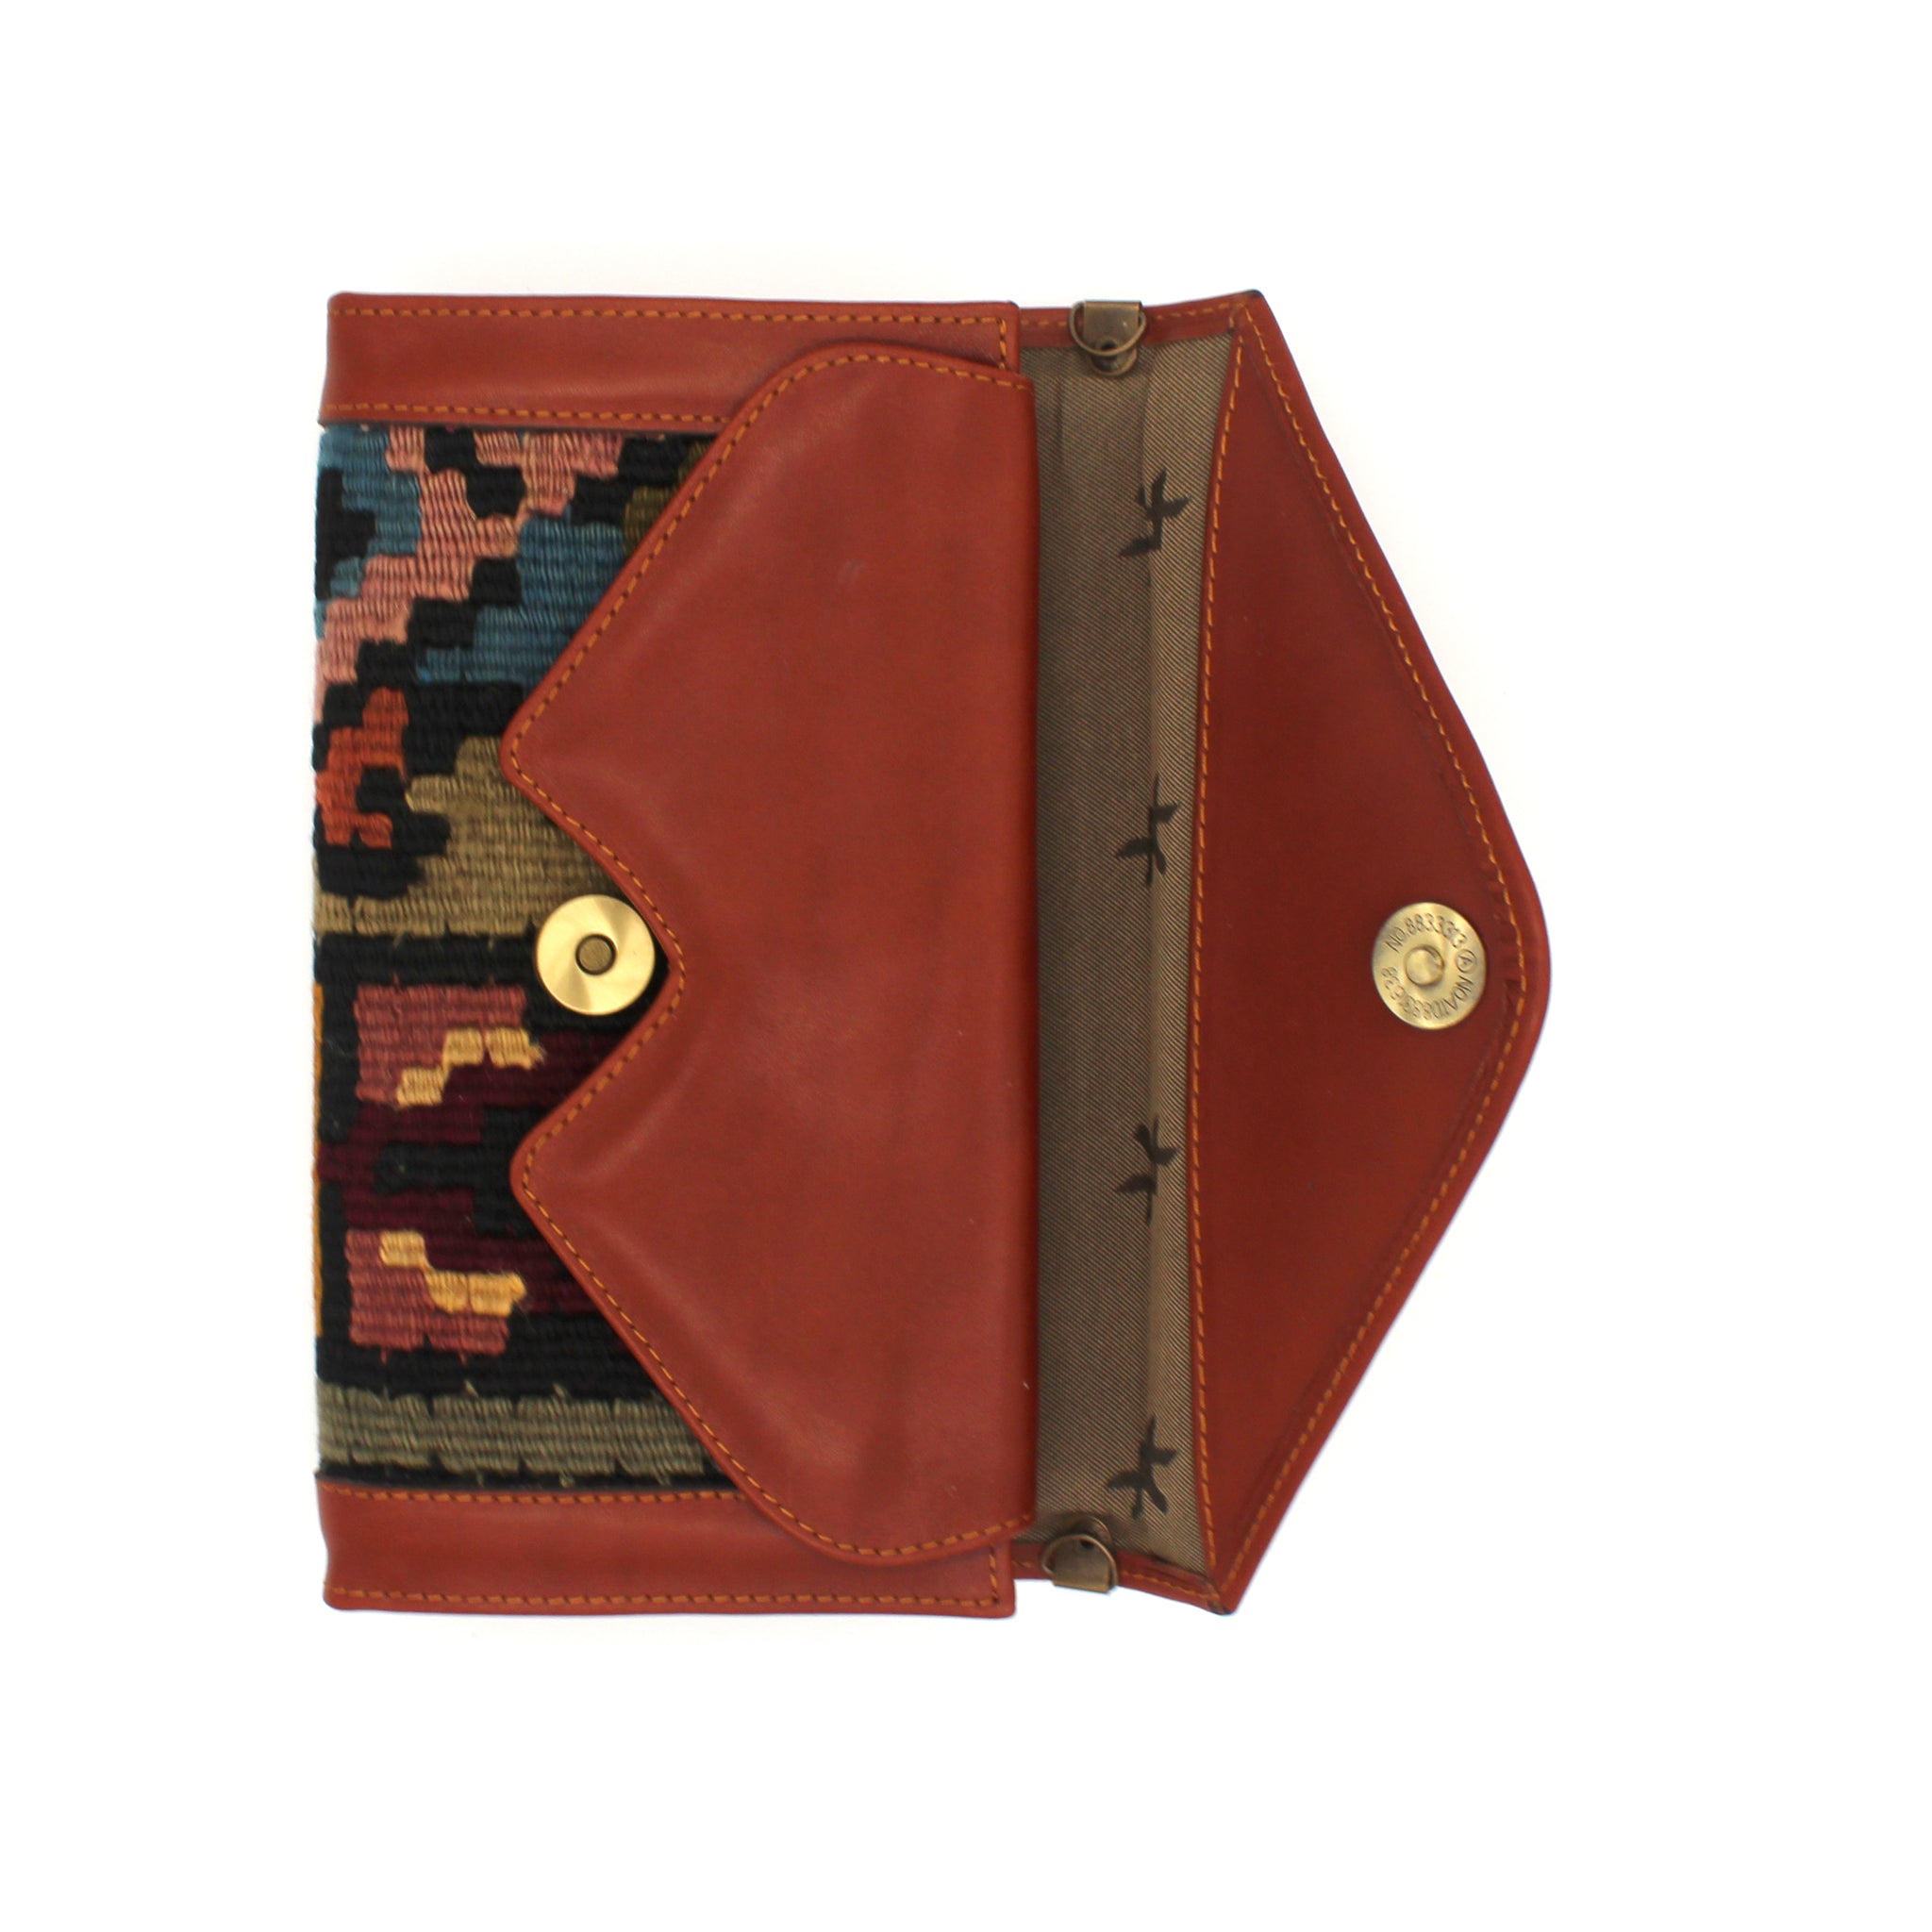 Vintage Rug and Leather Wallet with Strap No. 9